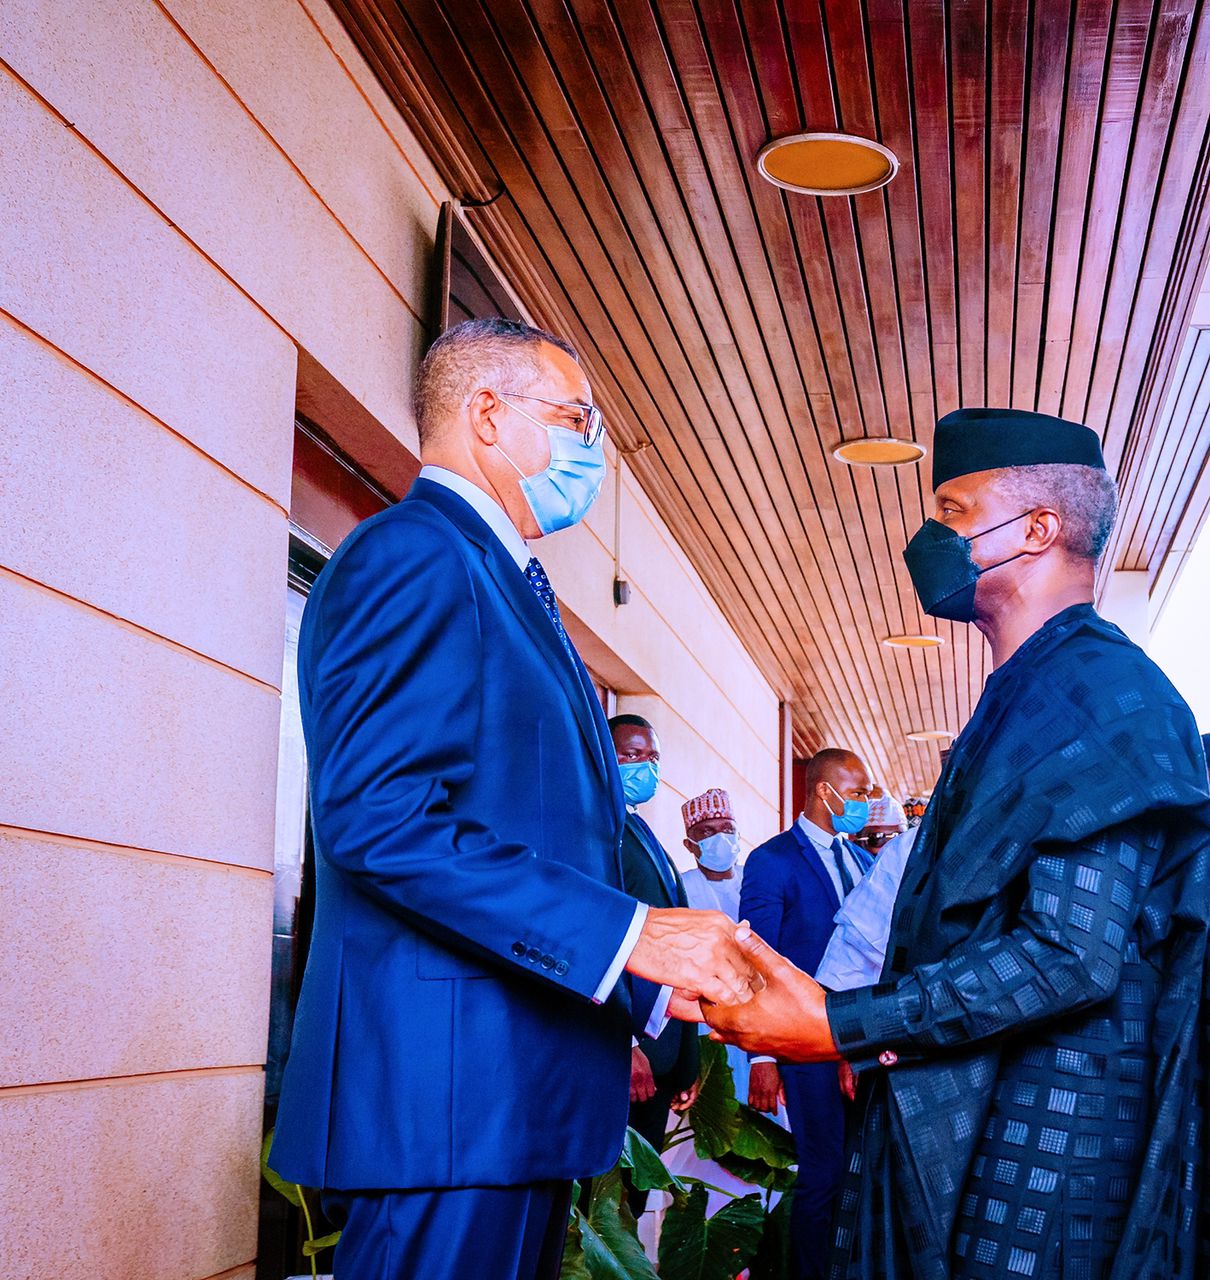 Nigeria’s Relations With Sao Tome And Principe Growing, Says Osinbajo At Presidential Inauguration